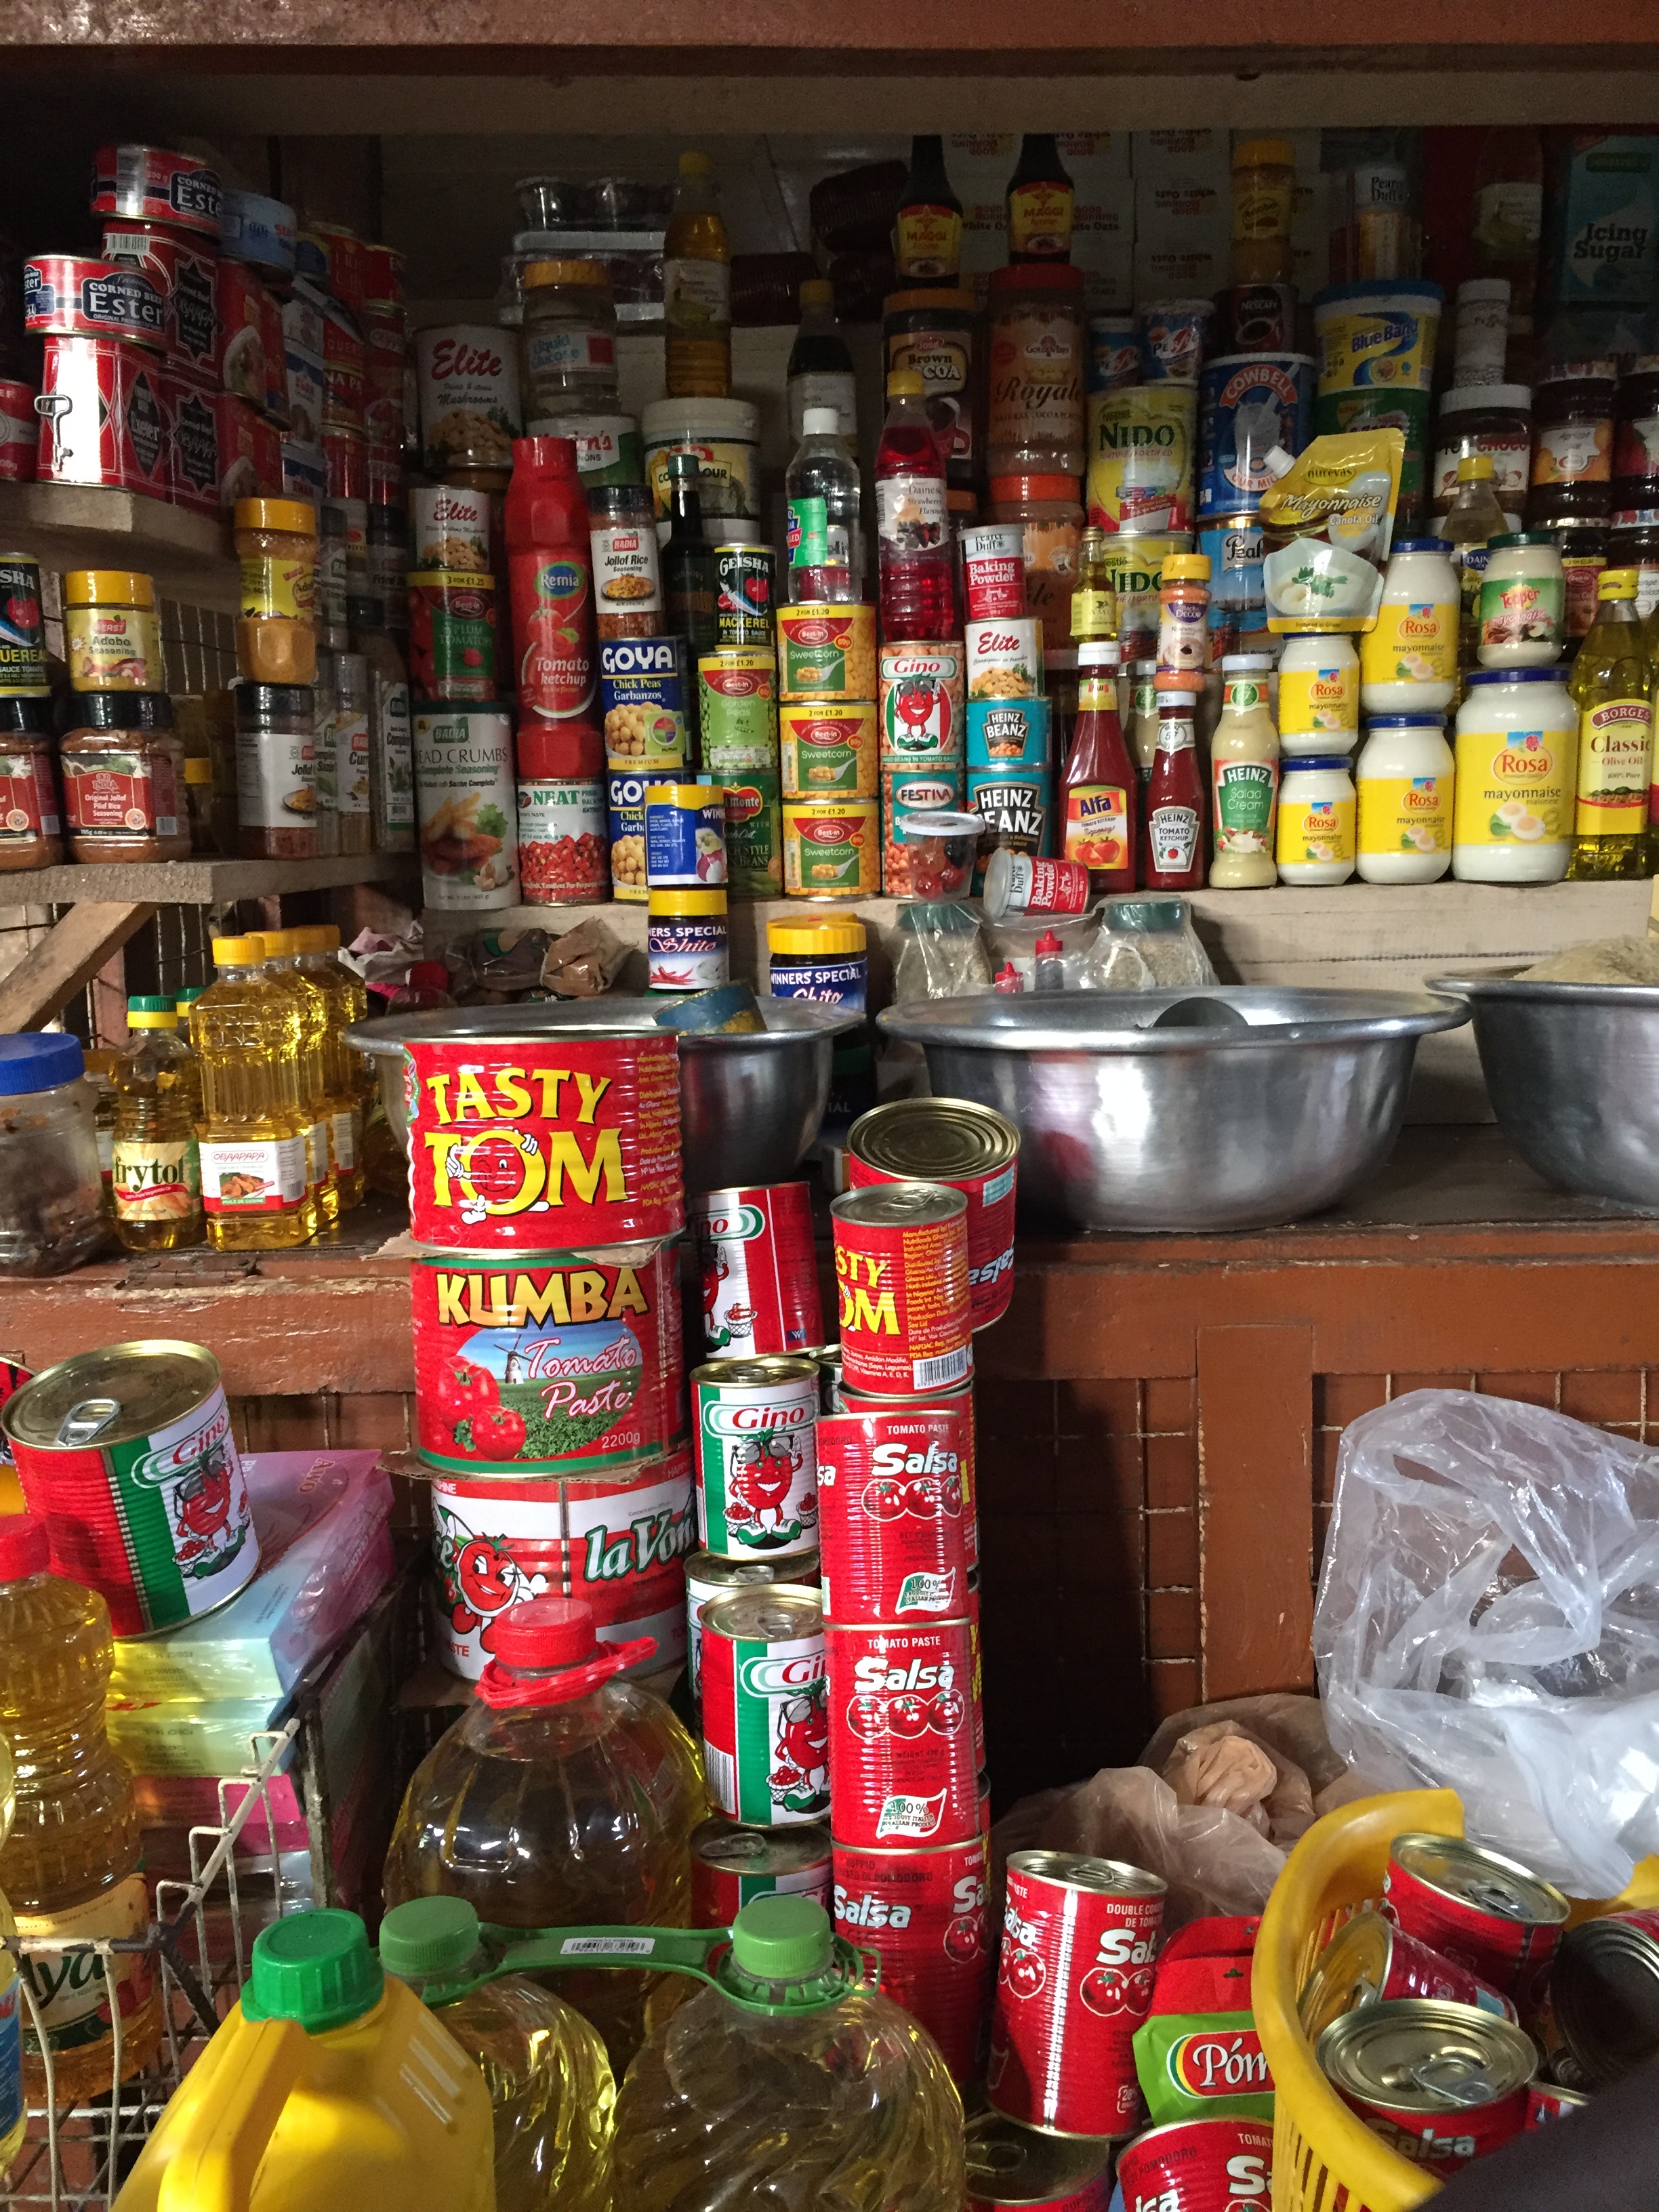 stacks of canned goods such as tomato paste, oil, ketchup, mayonnaise, powered milk and spice